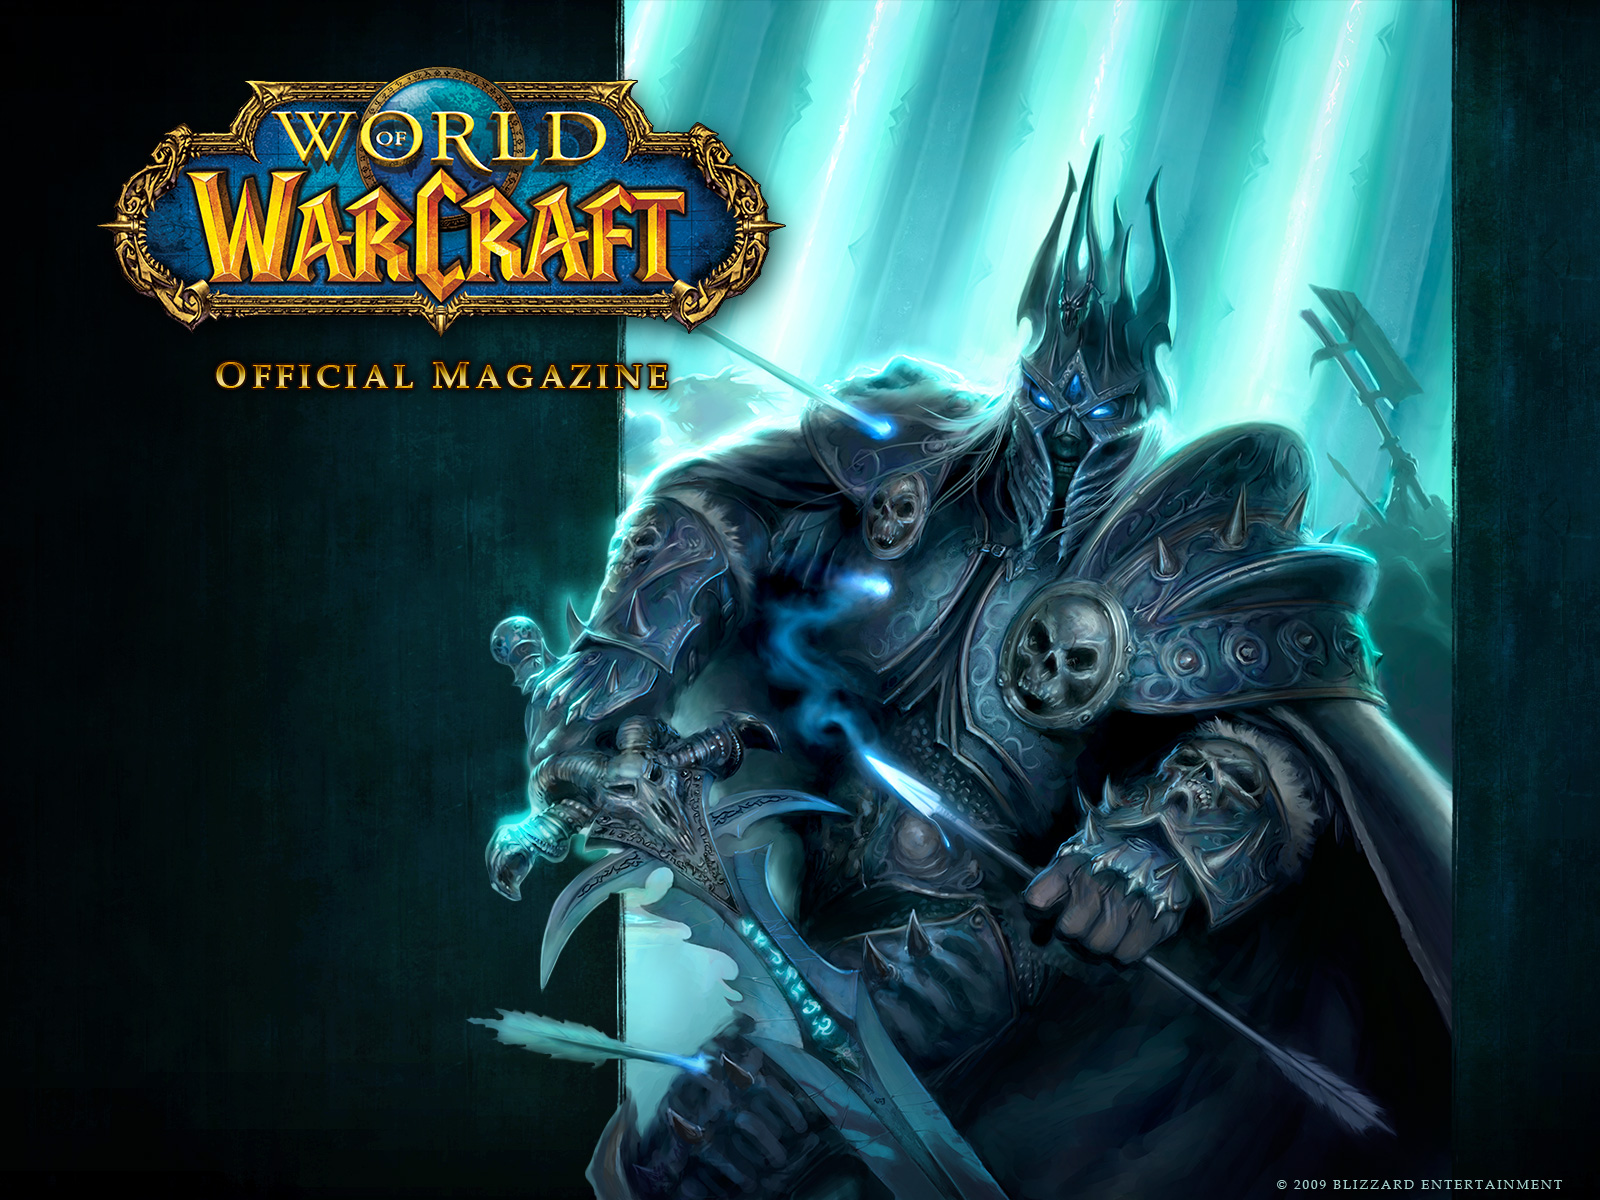 World Of Warcraft Background And Posters Hope You Like This